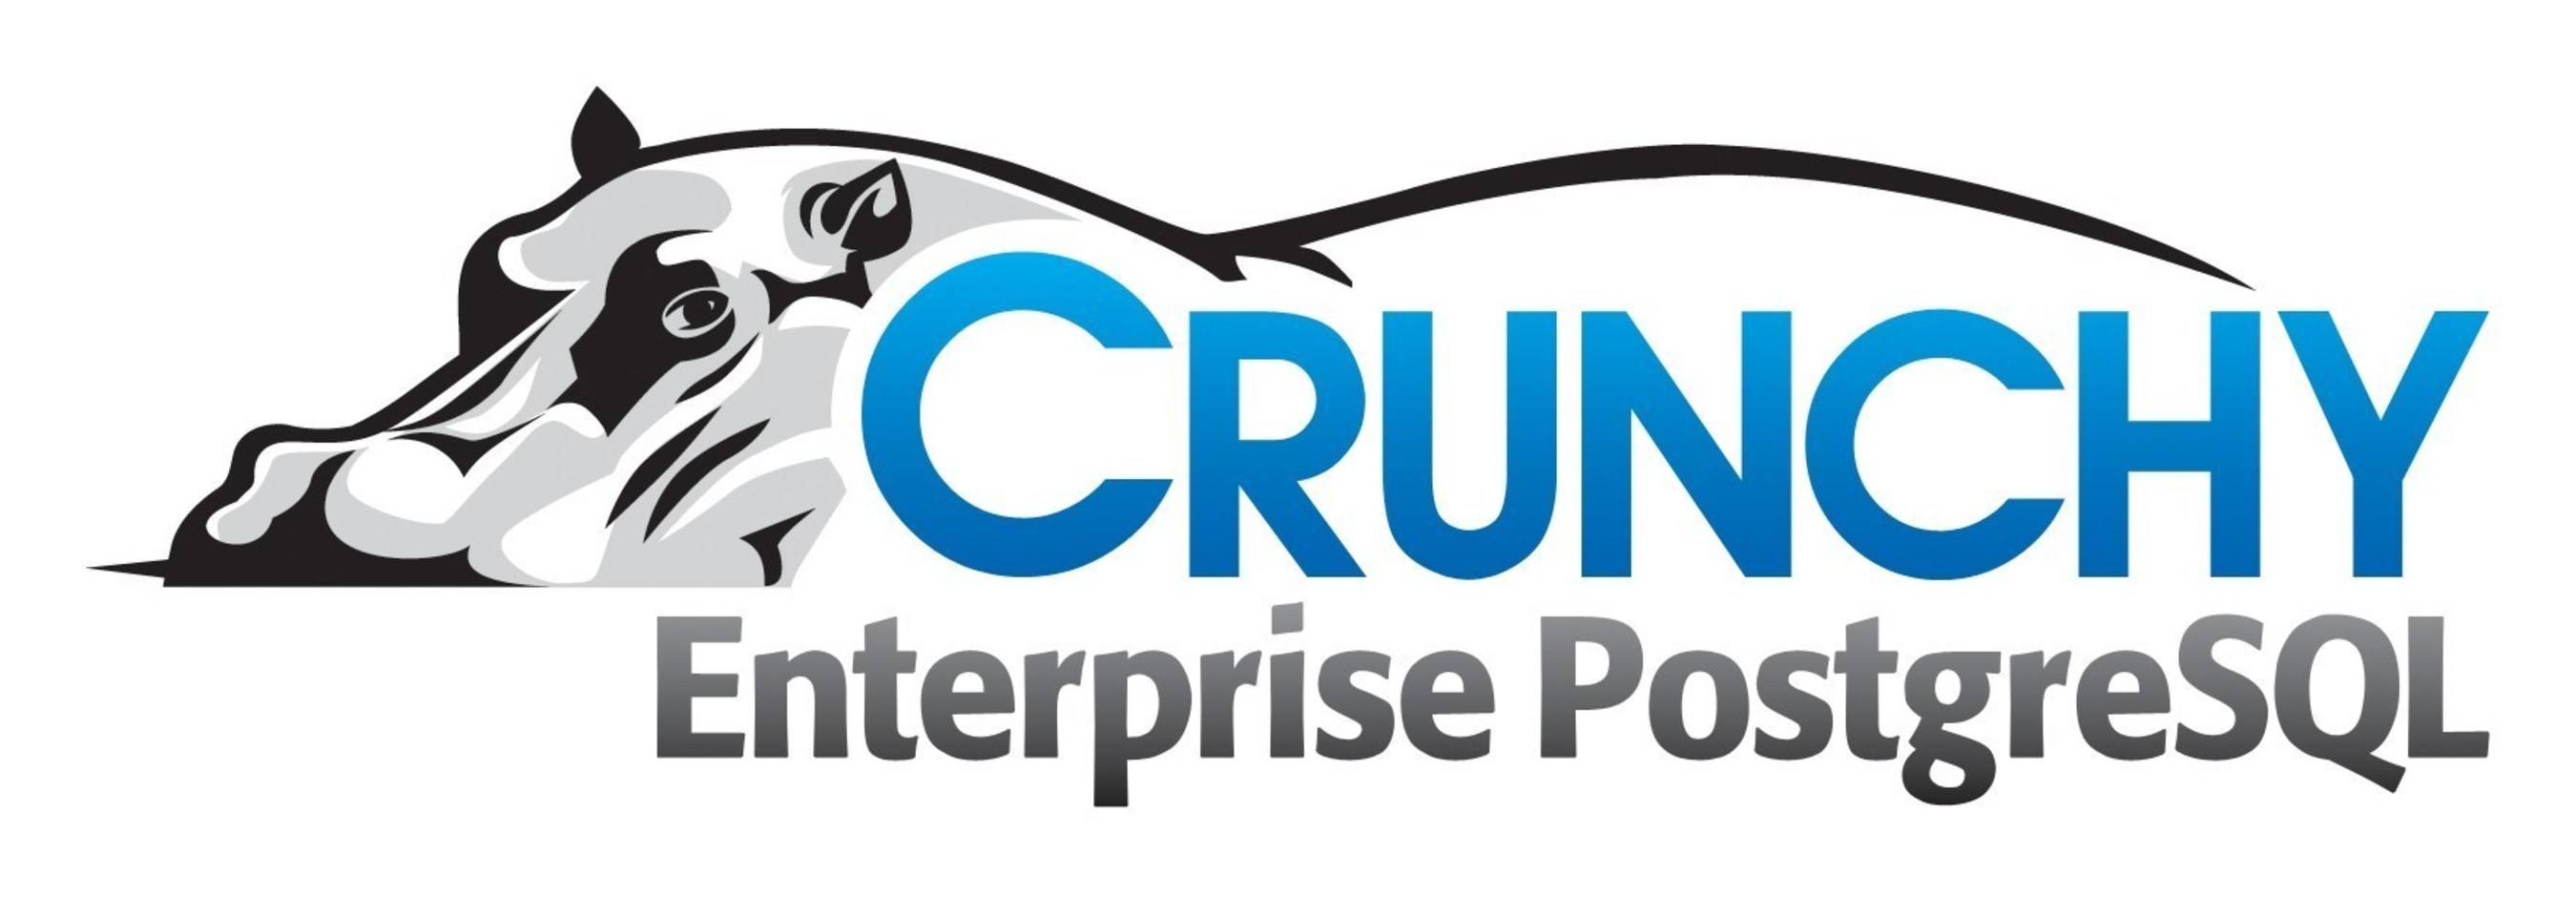 Crunchy Data Solutions, Inc. (Crunchy) is a fast growing provider of Crunchy Certified PostgreSQL, a trusted, open-source distribution of PostgreSQL, the world's most advanced open source database.